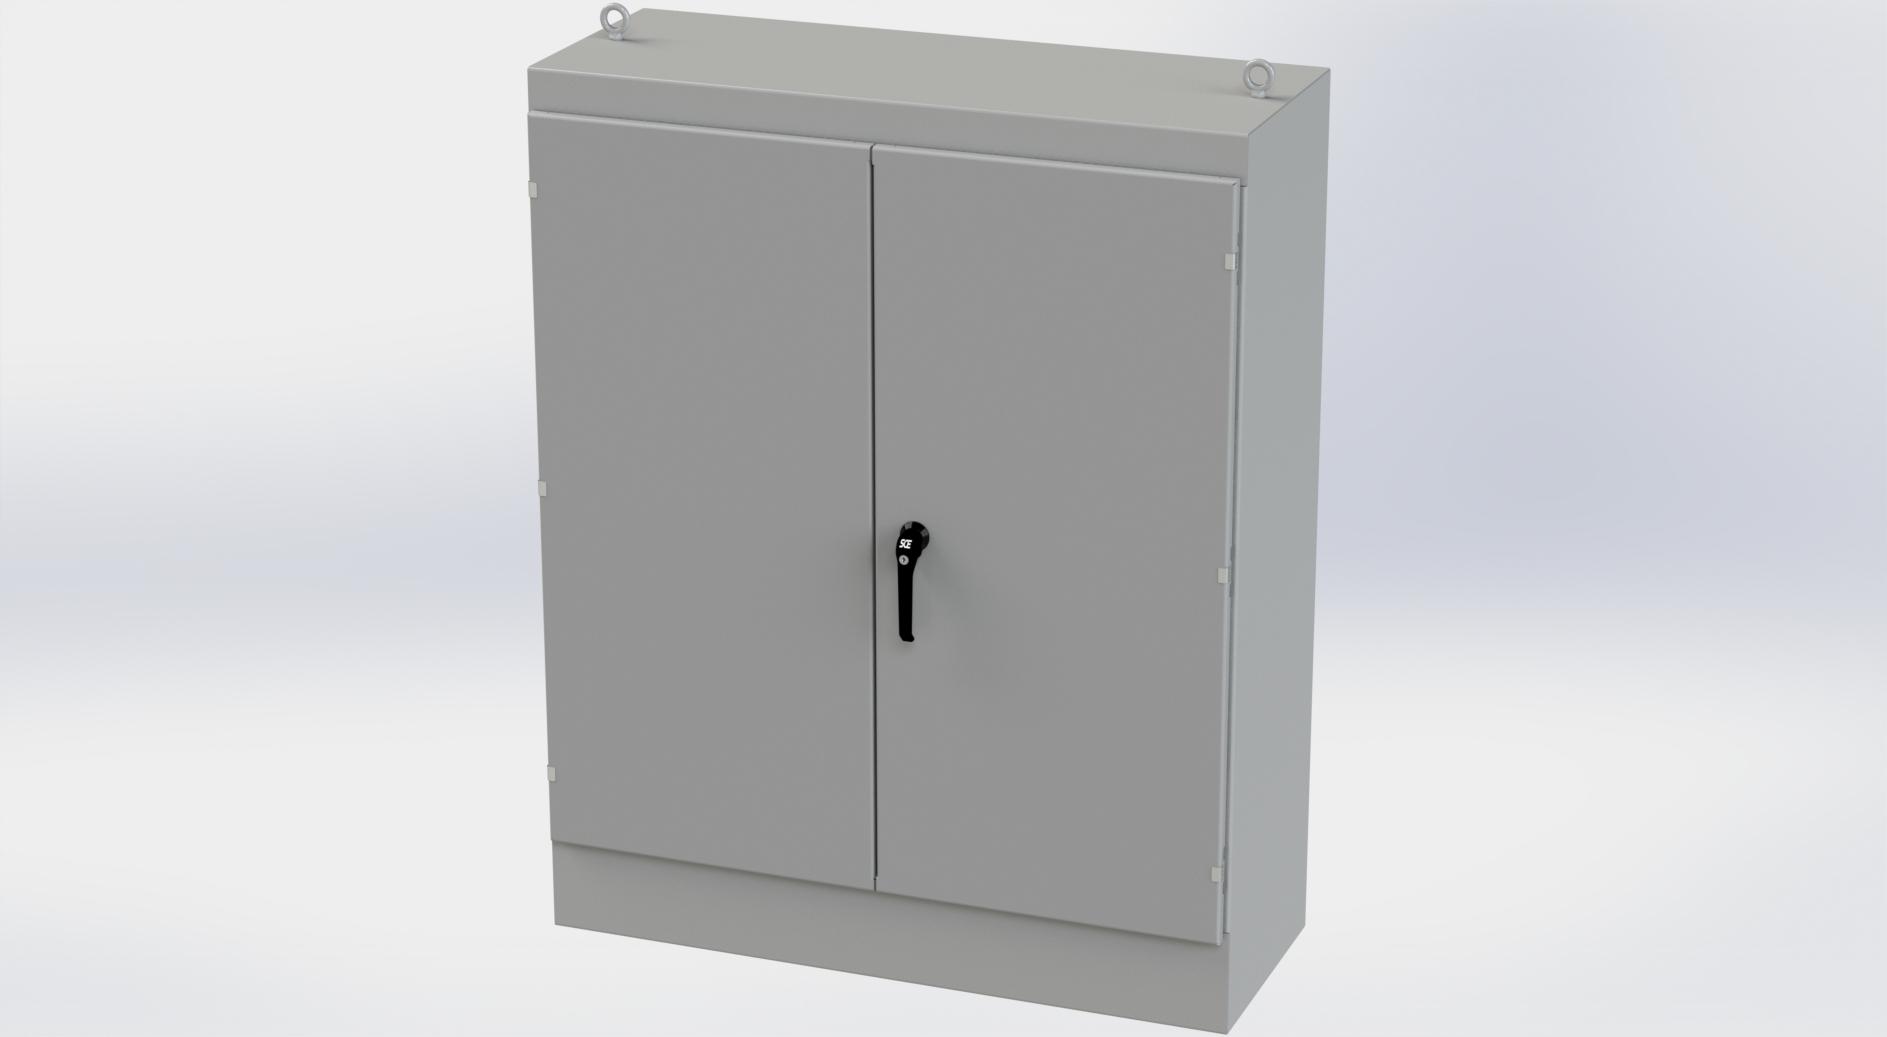 Saginaw Control SCE-604818FSD FSD Enclosure, Height:60.00", Width:48.00", Depth:18.00", ANSI-61 gray finish inside and out. Optional sub-panels are powder coated white.